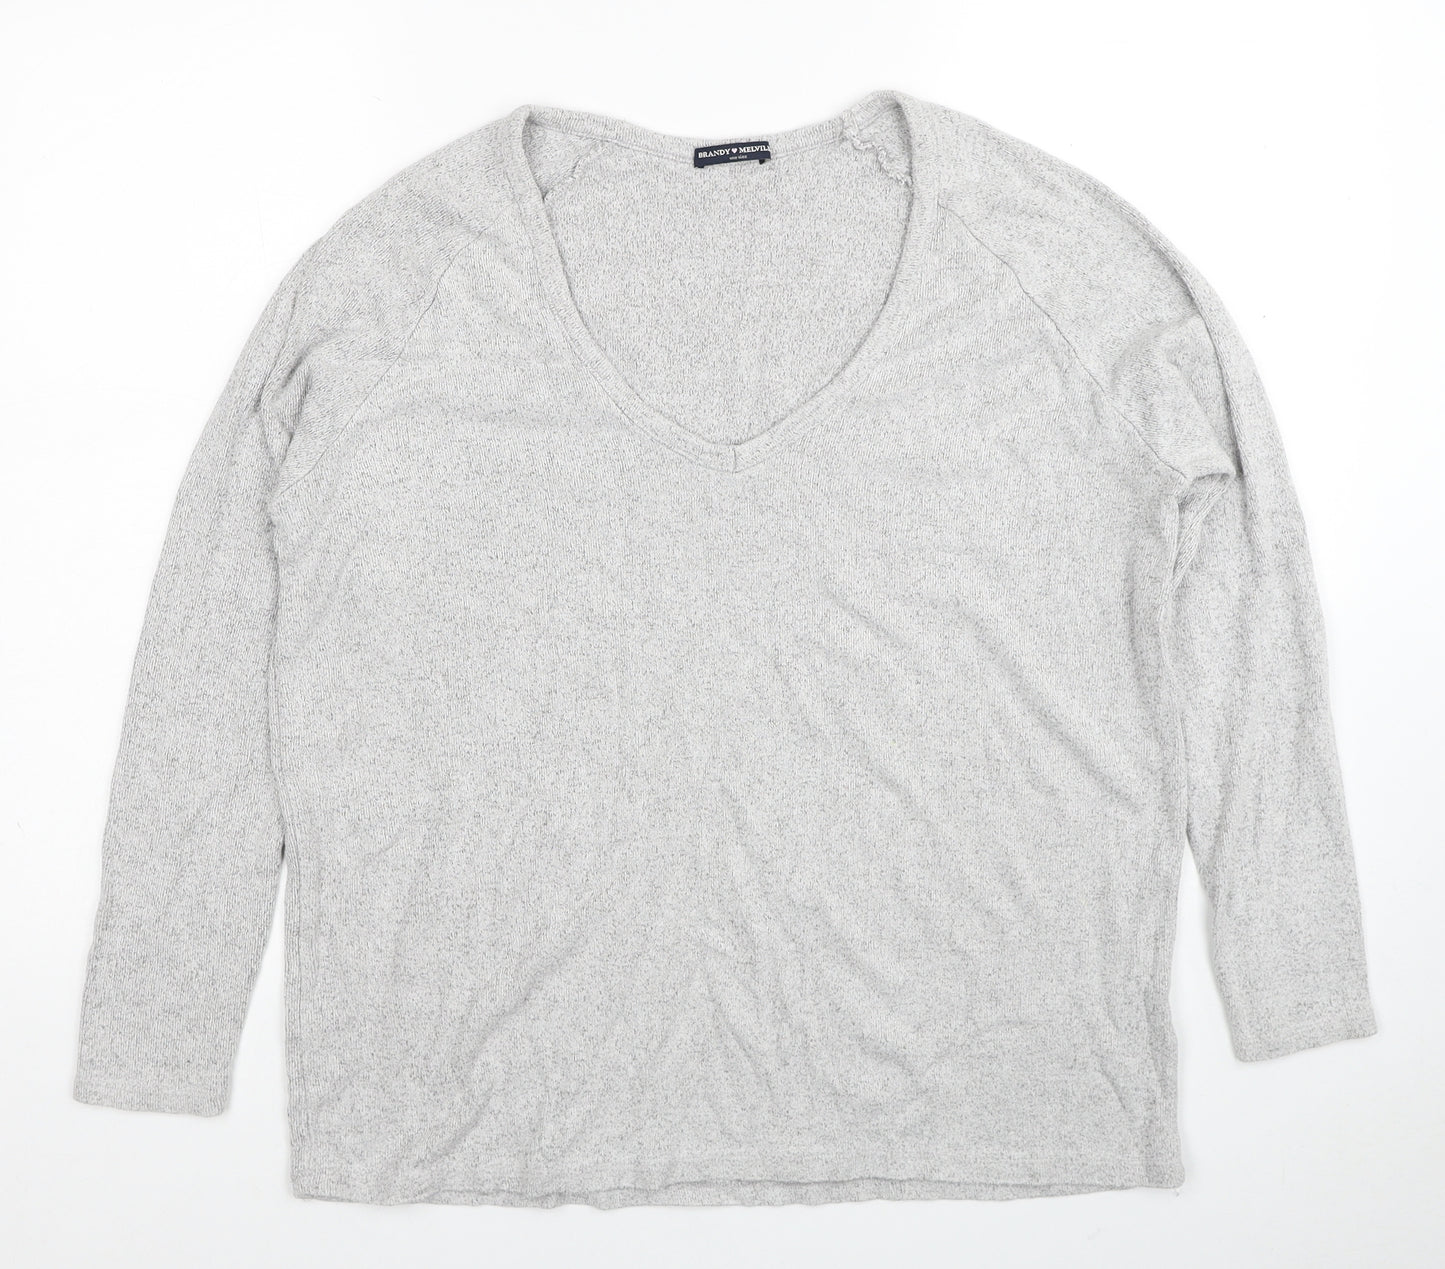 Brandy Melville Womens Grey V-Neck Cotton Pullover Jumper One Size